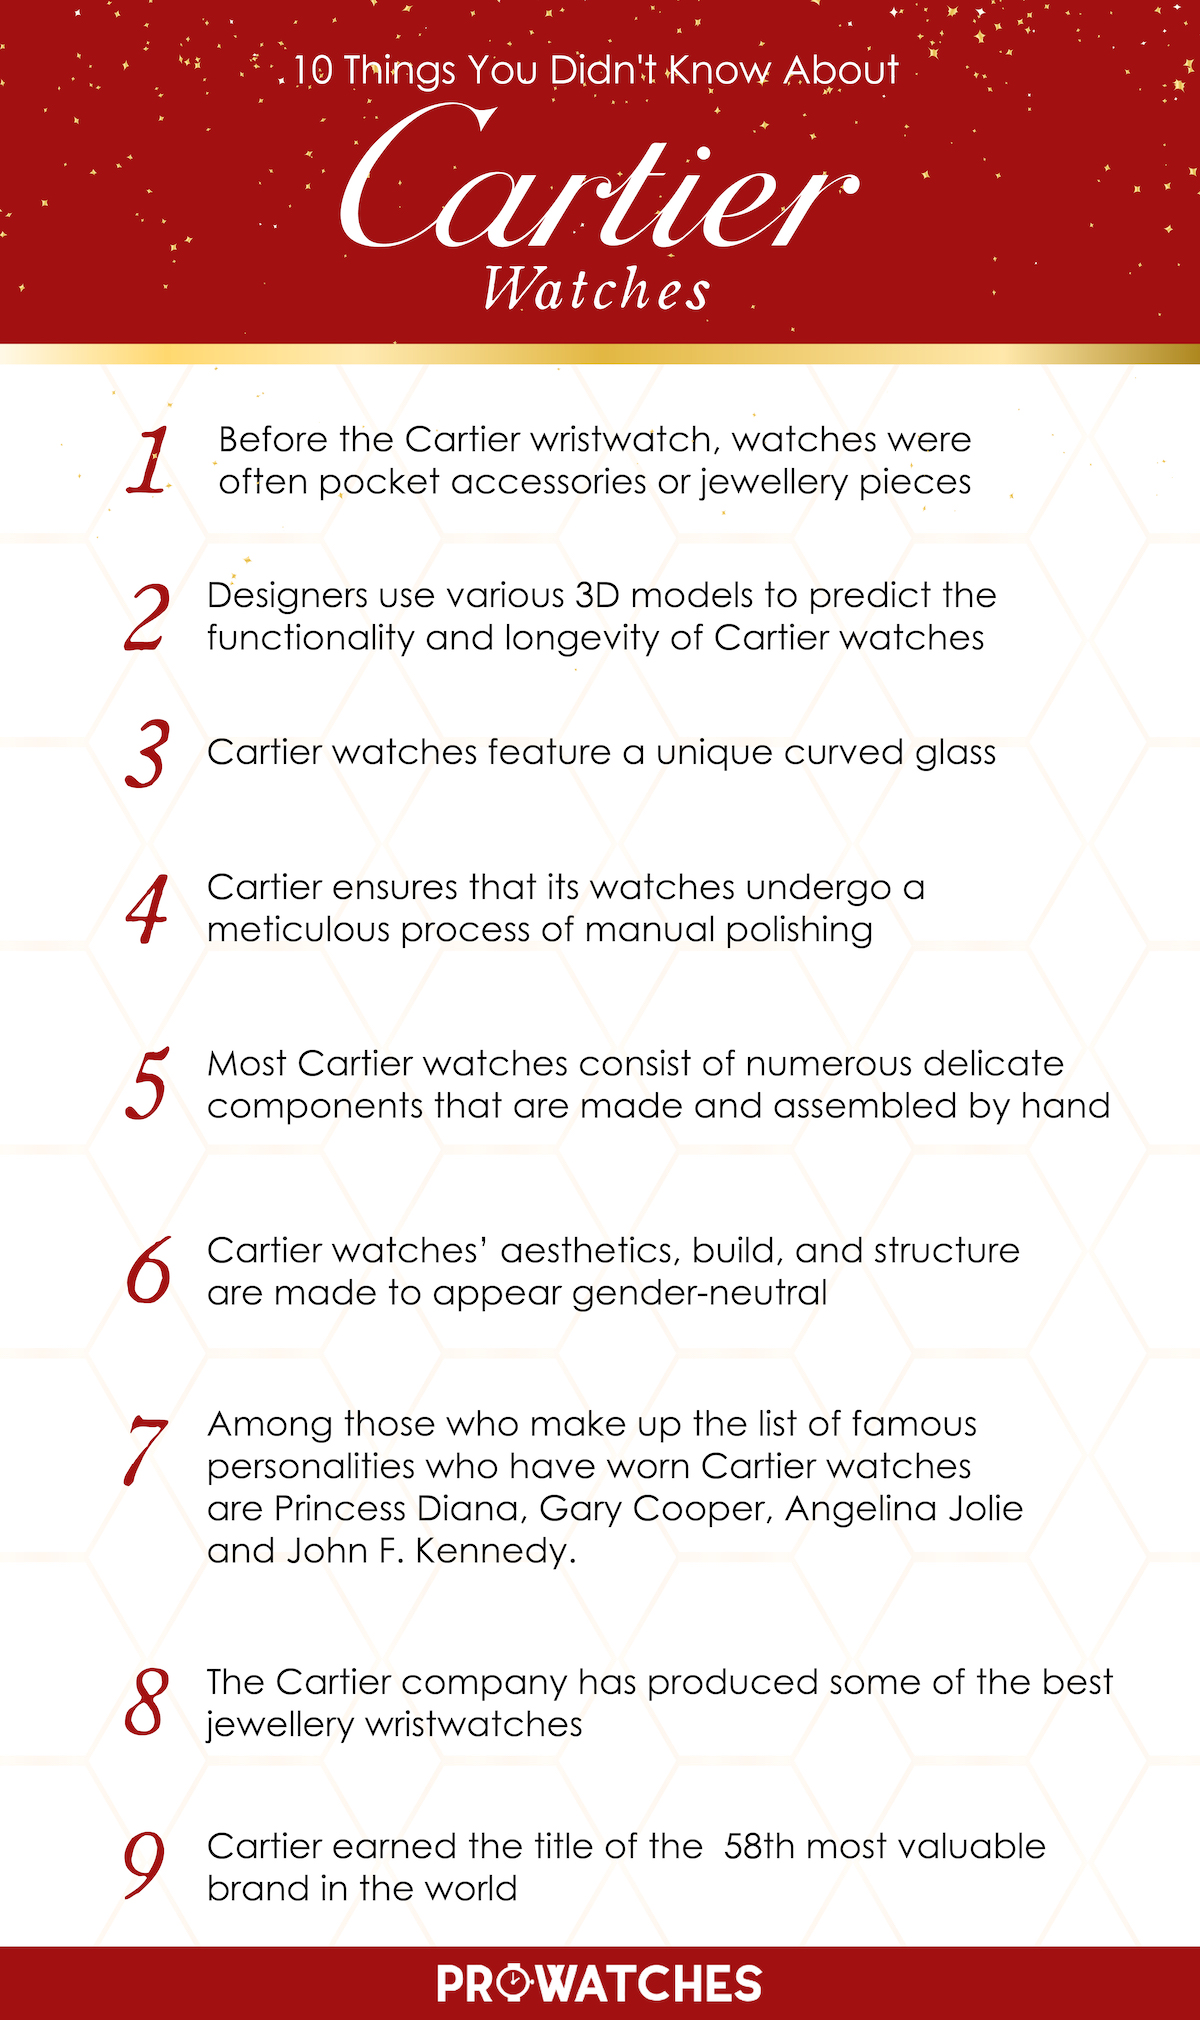 Cartier, Cartier Watches, Things You Didn't Know About Cartier